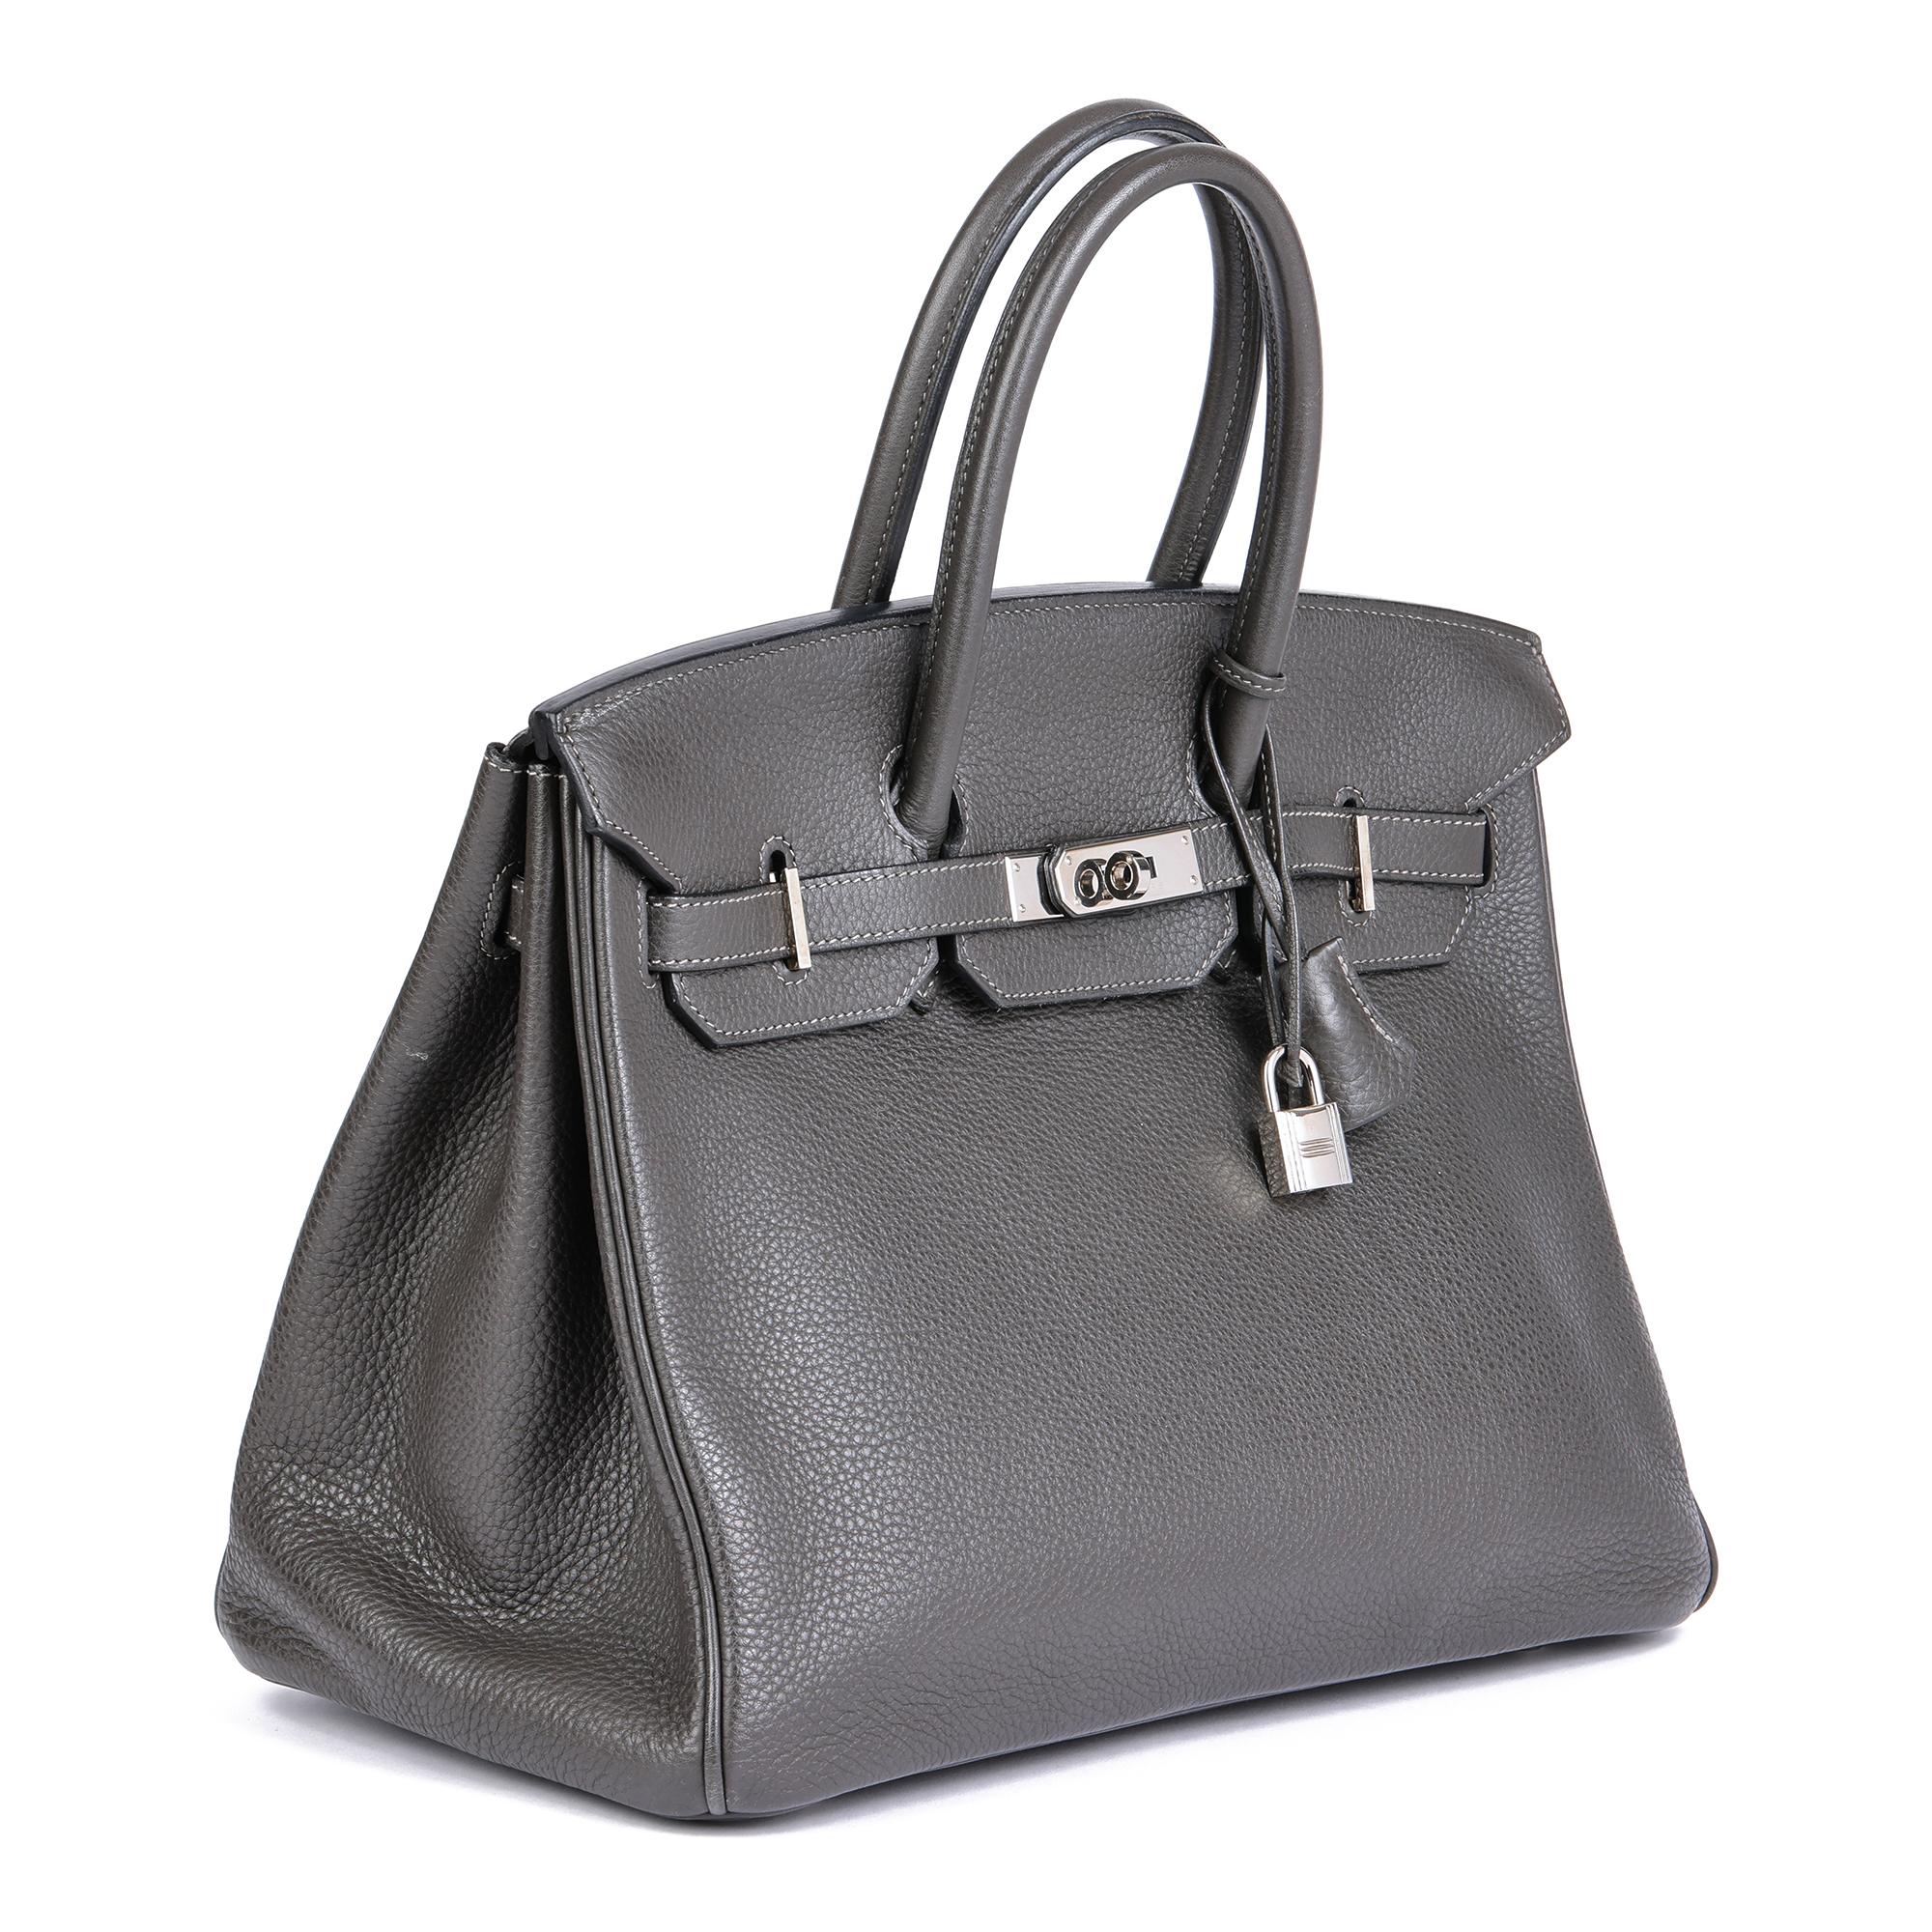 HERMES
Graphite Togo Leather Birkin 35cm 

Xupes Reference: HB4701
Serial Number: [K]
Age (Circa): 2007
Accompanied By: Hermès Dust Bag, Rain Cover, Padlock, Keys, Clochette, Care Booklet, Protective Felt 
Authenticity Details: Date Stamp (Made in